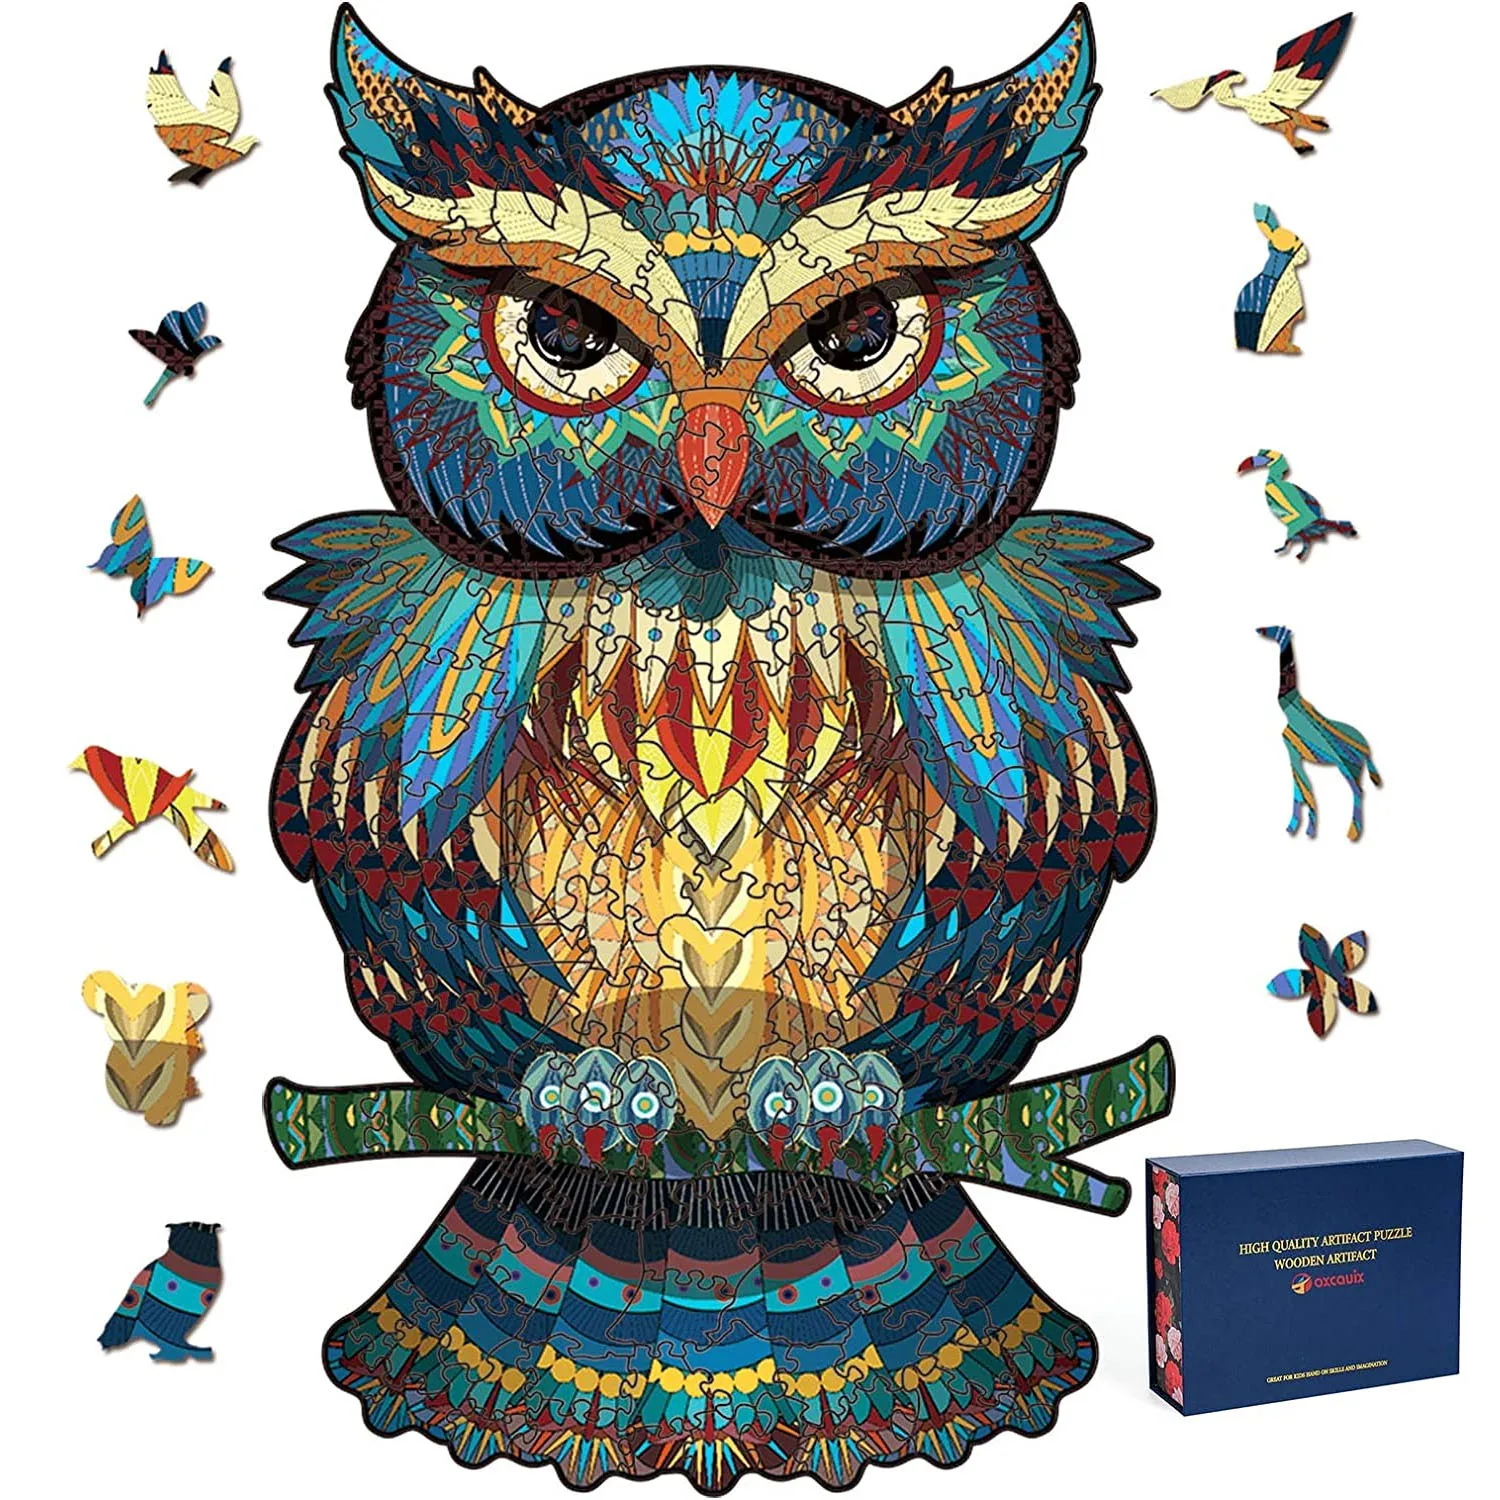 

Wooden Puzzles for Adults Owl 200 Pieces Jigsaw Puzzle Wood Unique Unicorn Elephant Animal Shaped Puzzles High quality Gift box